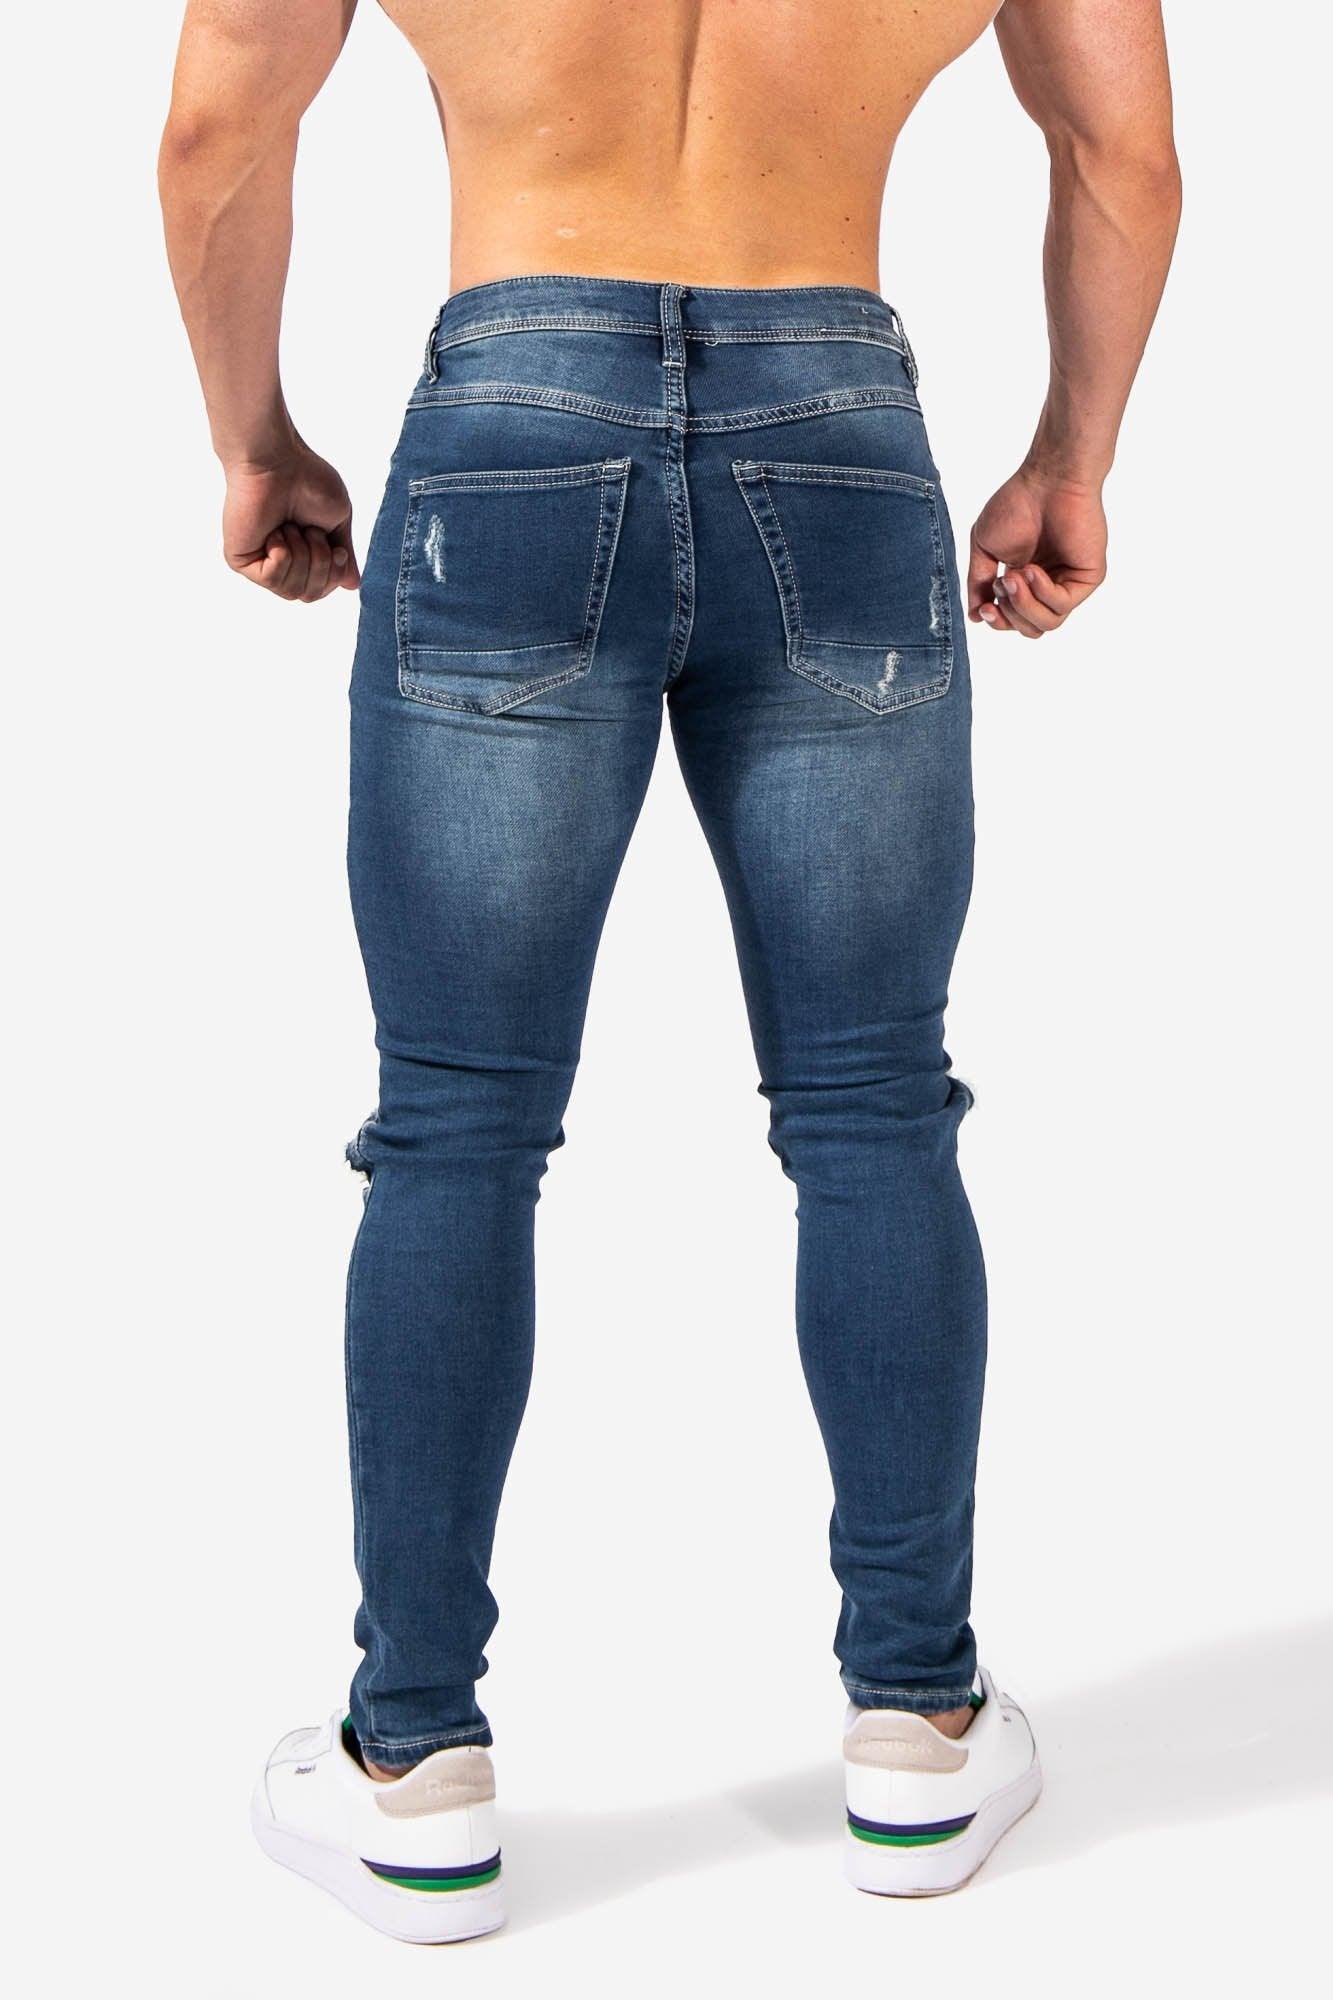 Denim Jeans for Men | Bodybuilding Fitness & Casual Wear | Jed North XL / Blue